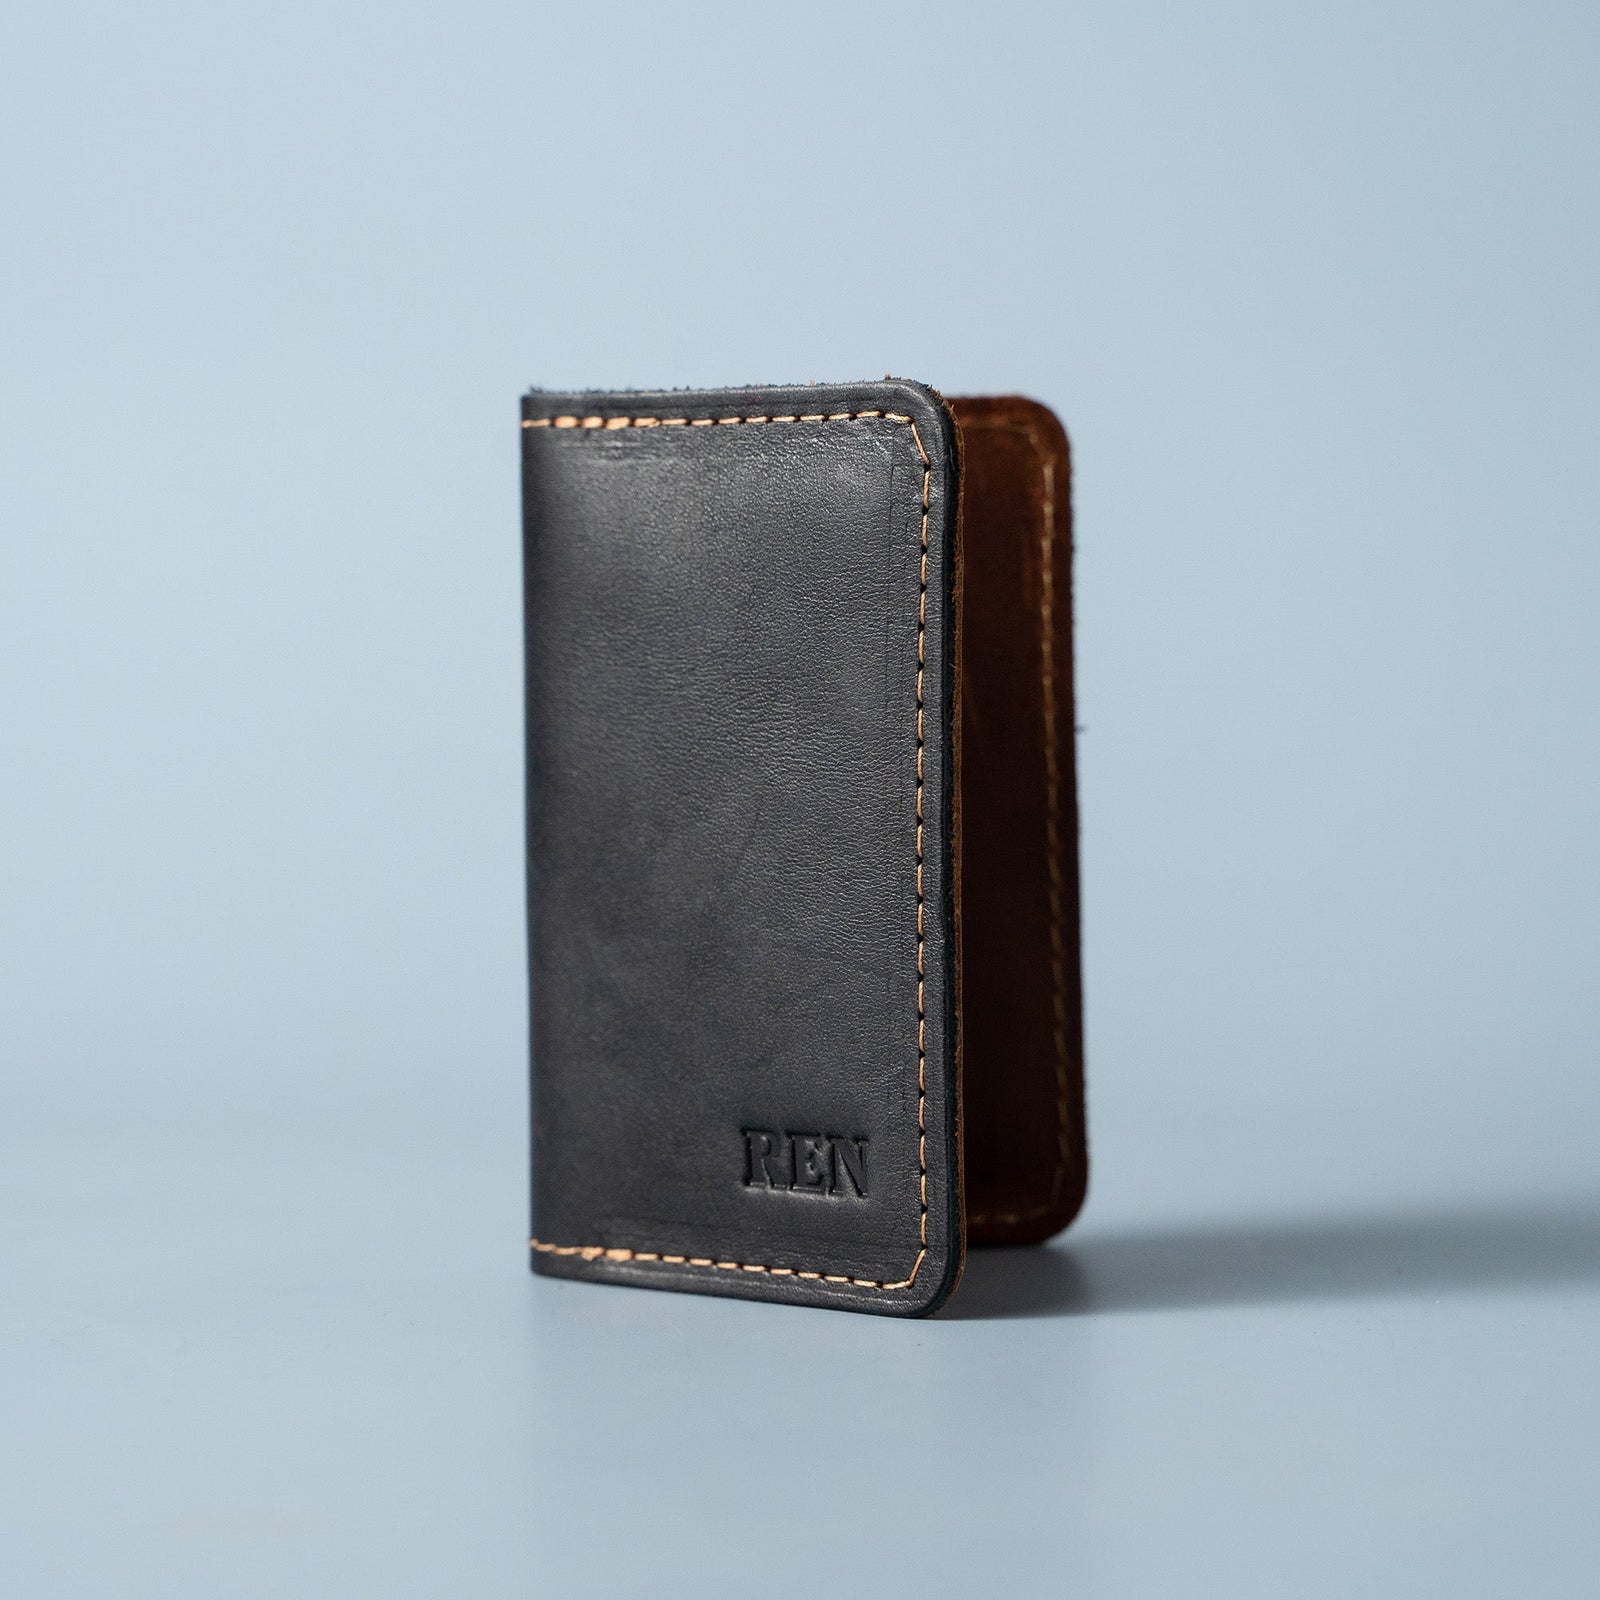 Top 20 Gifts for Engineers - Holtz Leather